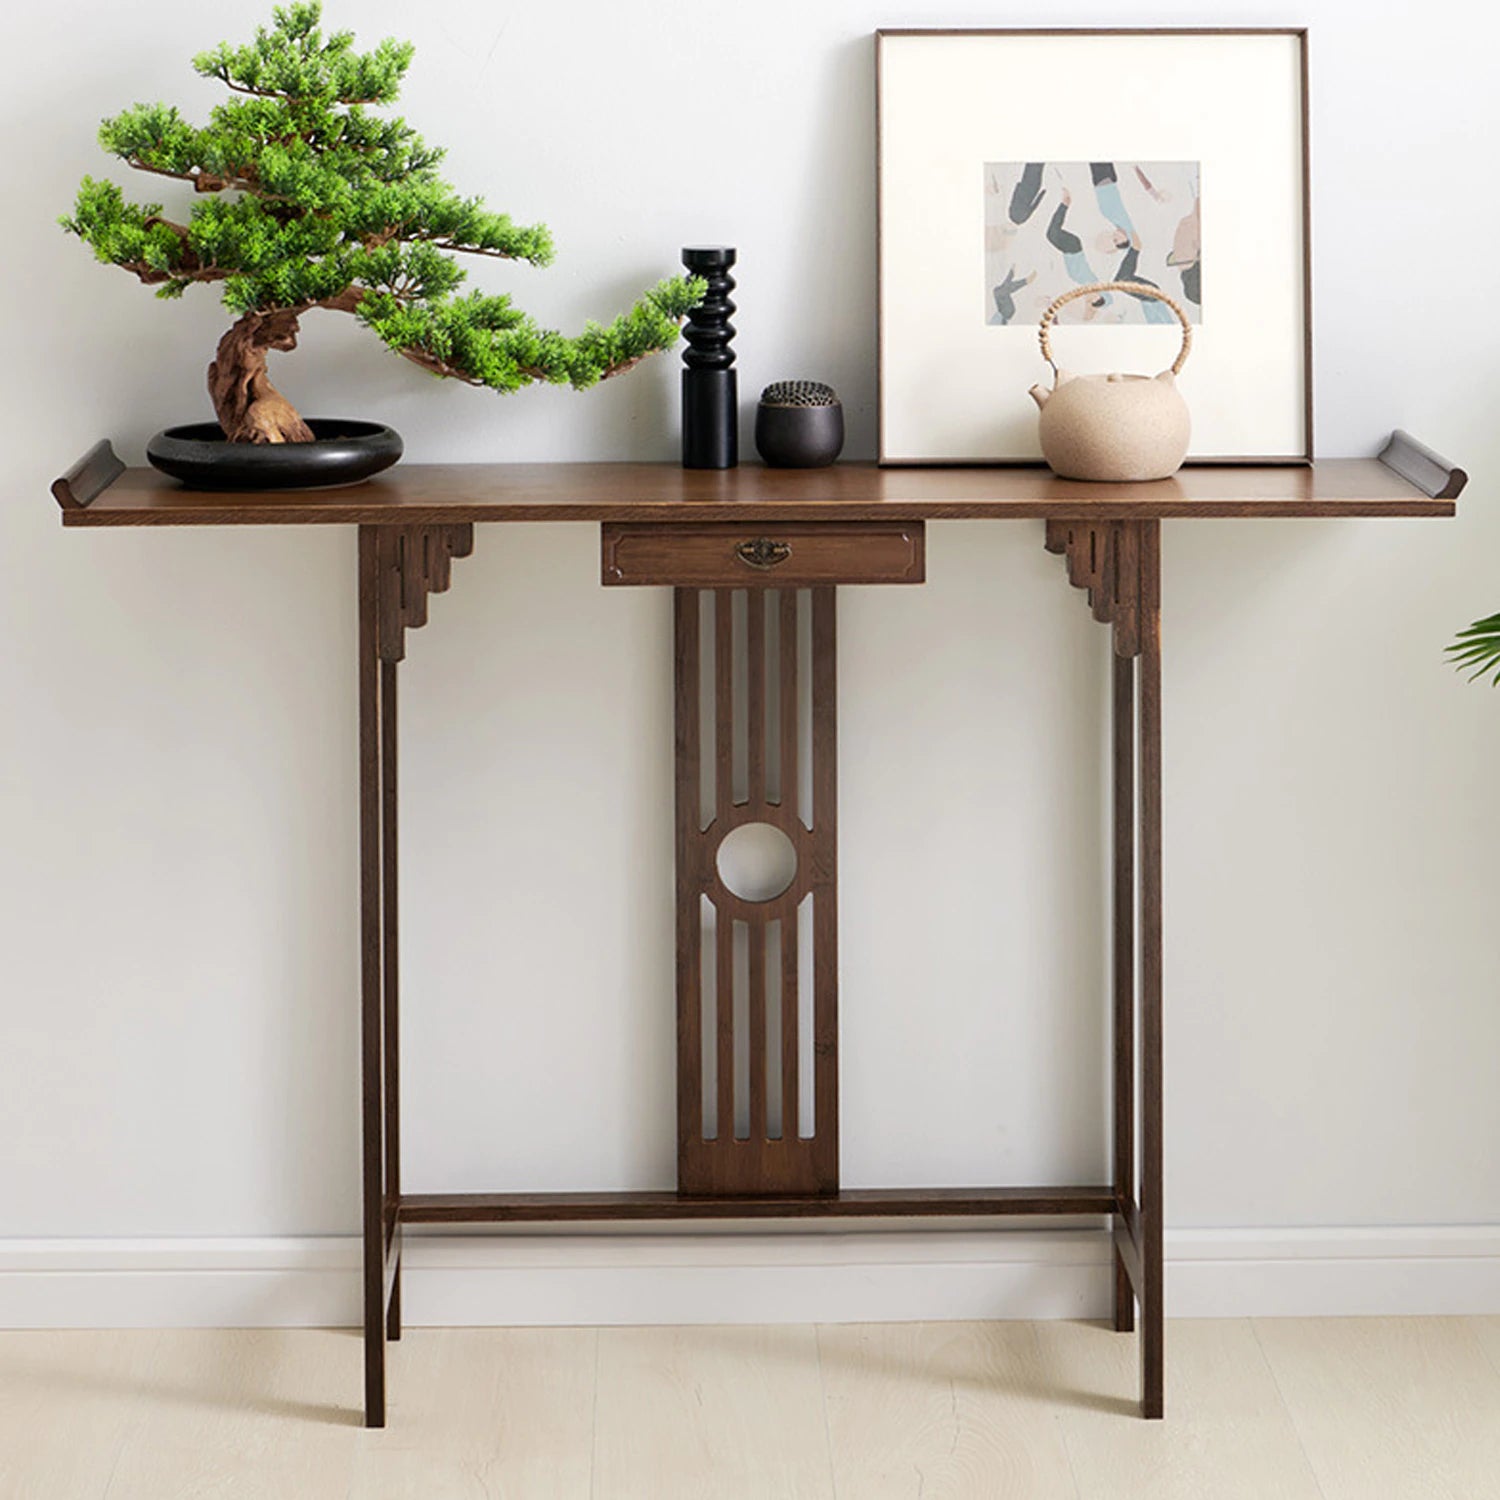 32" Console Table Rustic Sofa Table Accent Entryway Table for Living Room,Hallway Entrance